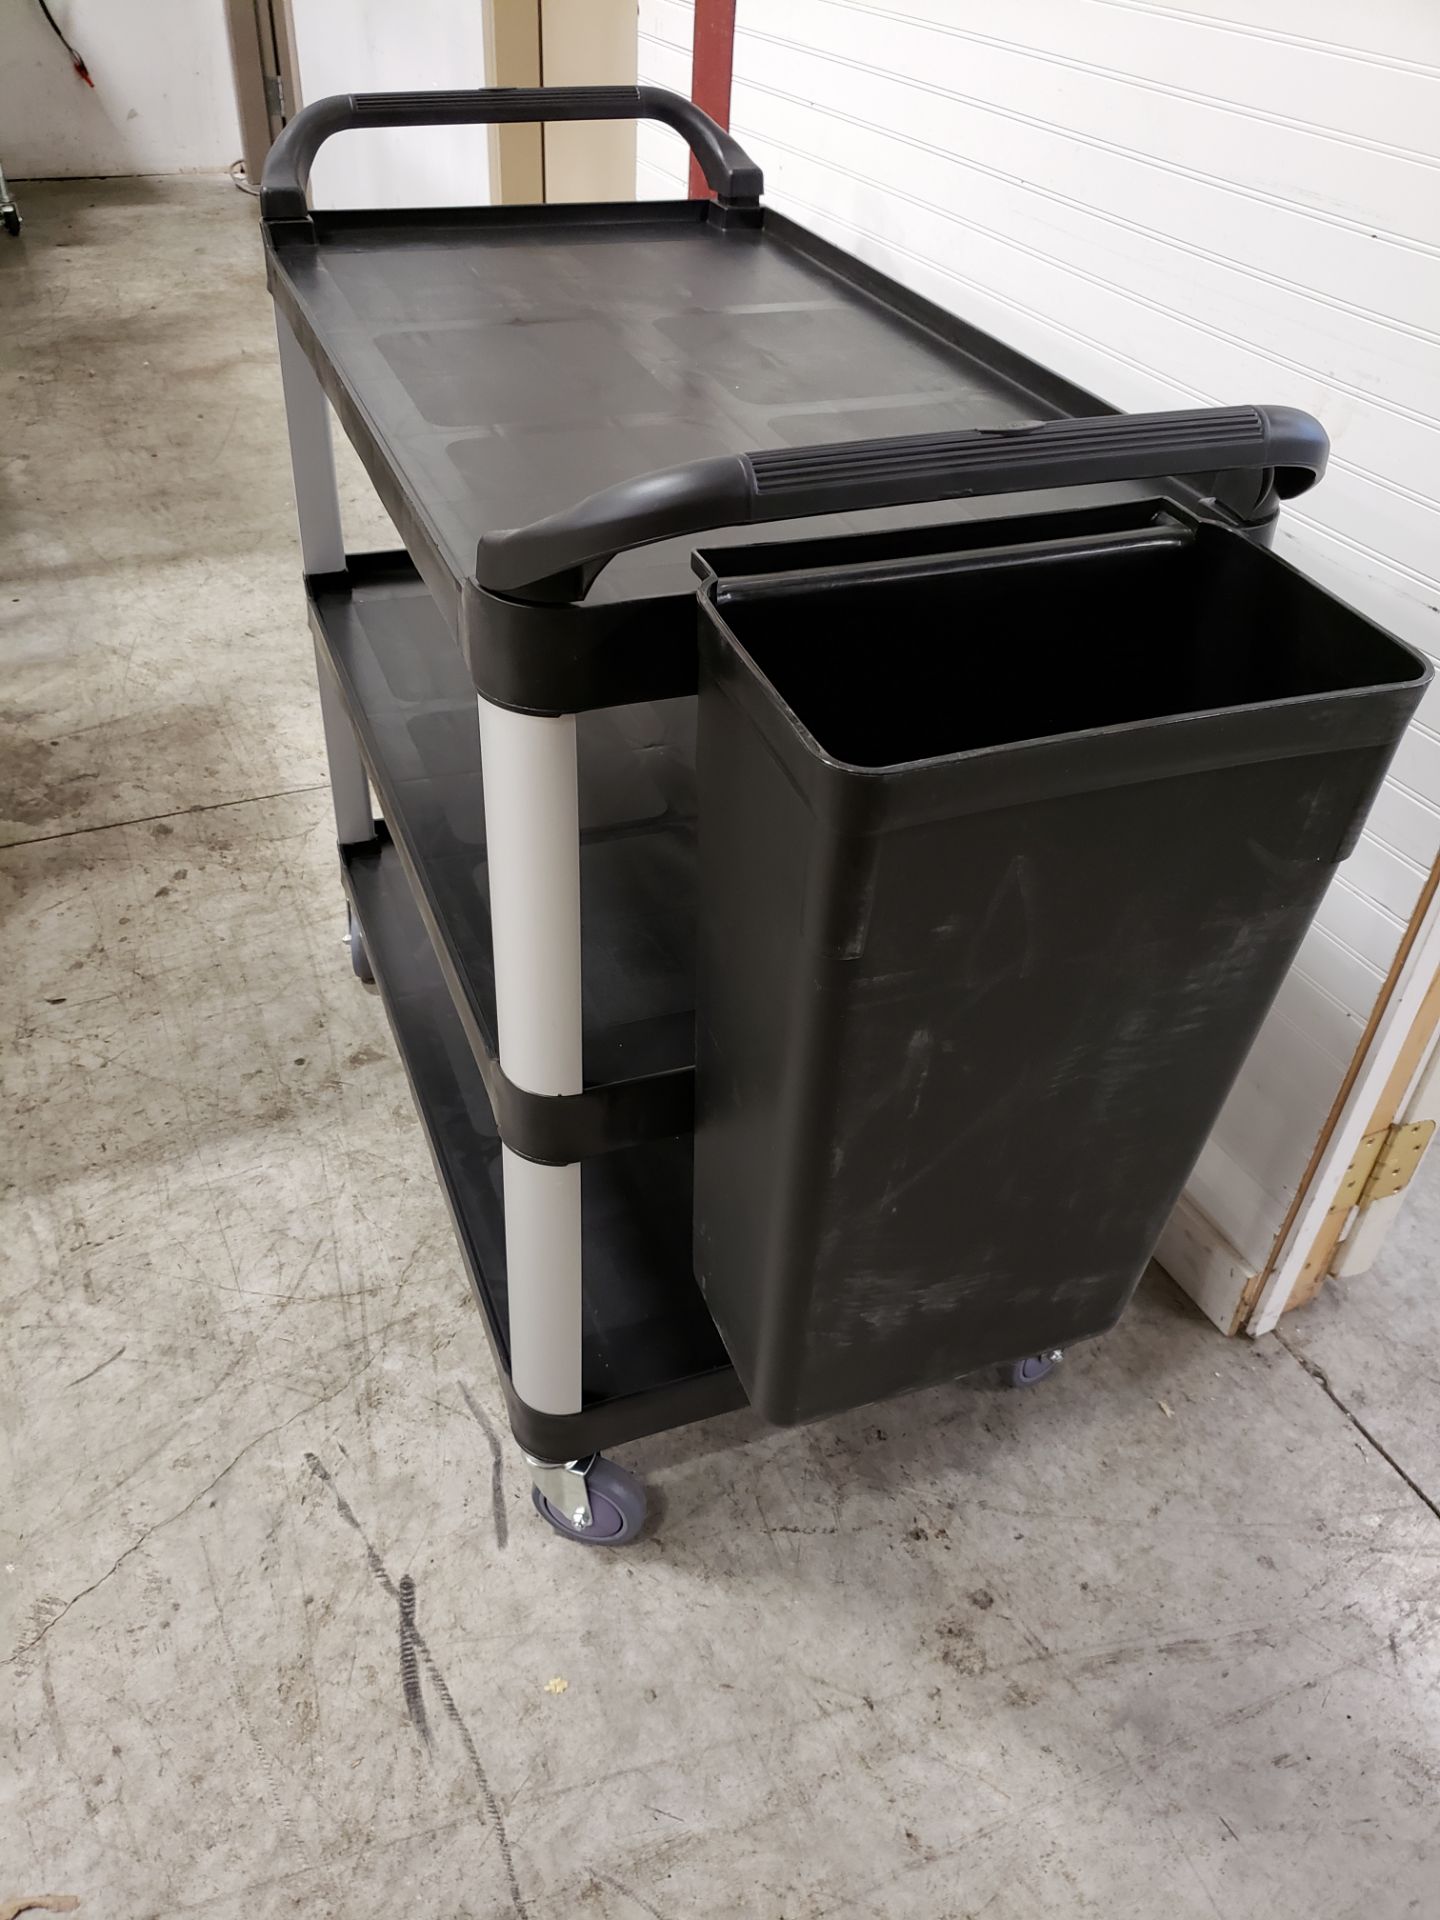 Black 3 Tier Cart with Waste Receptacle - 19.5" x 35" x 34" High on Casters - Image 2 of 5